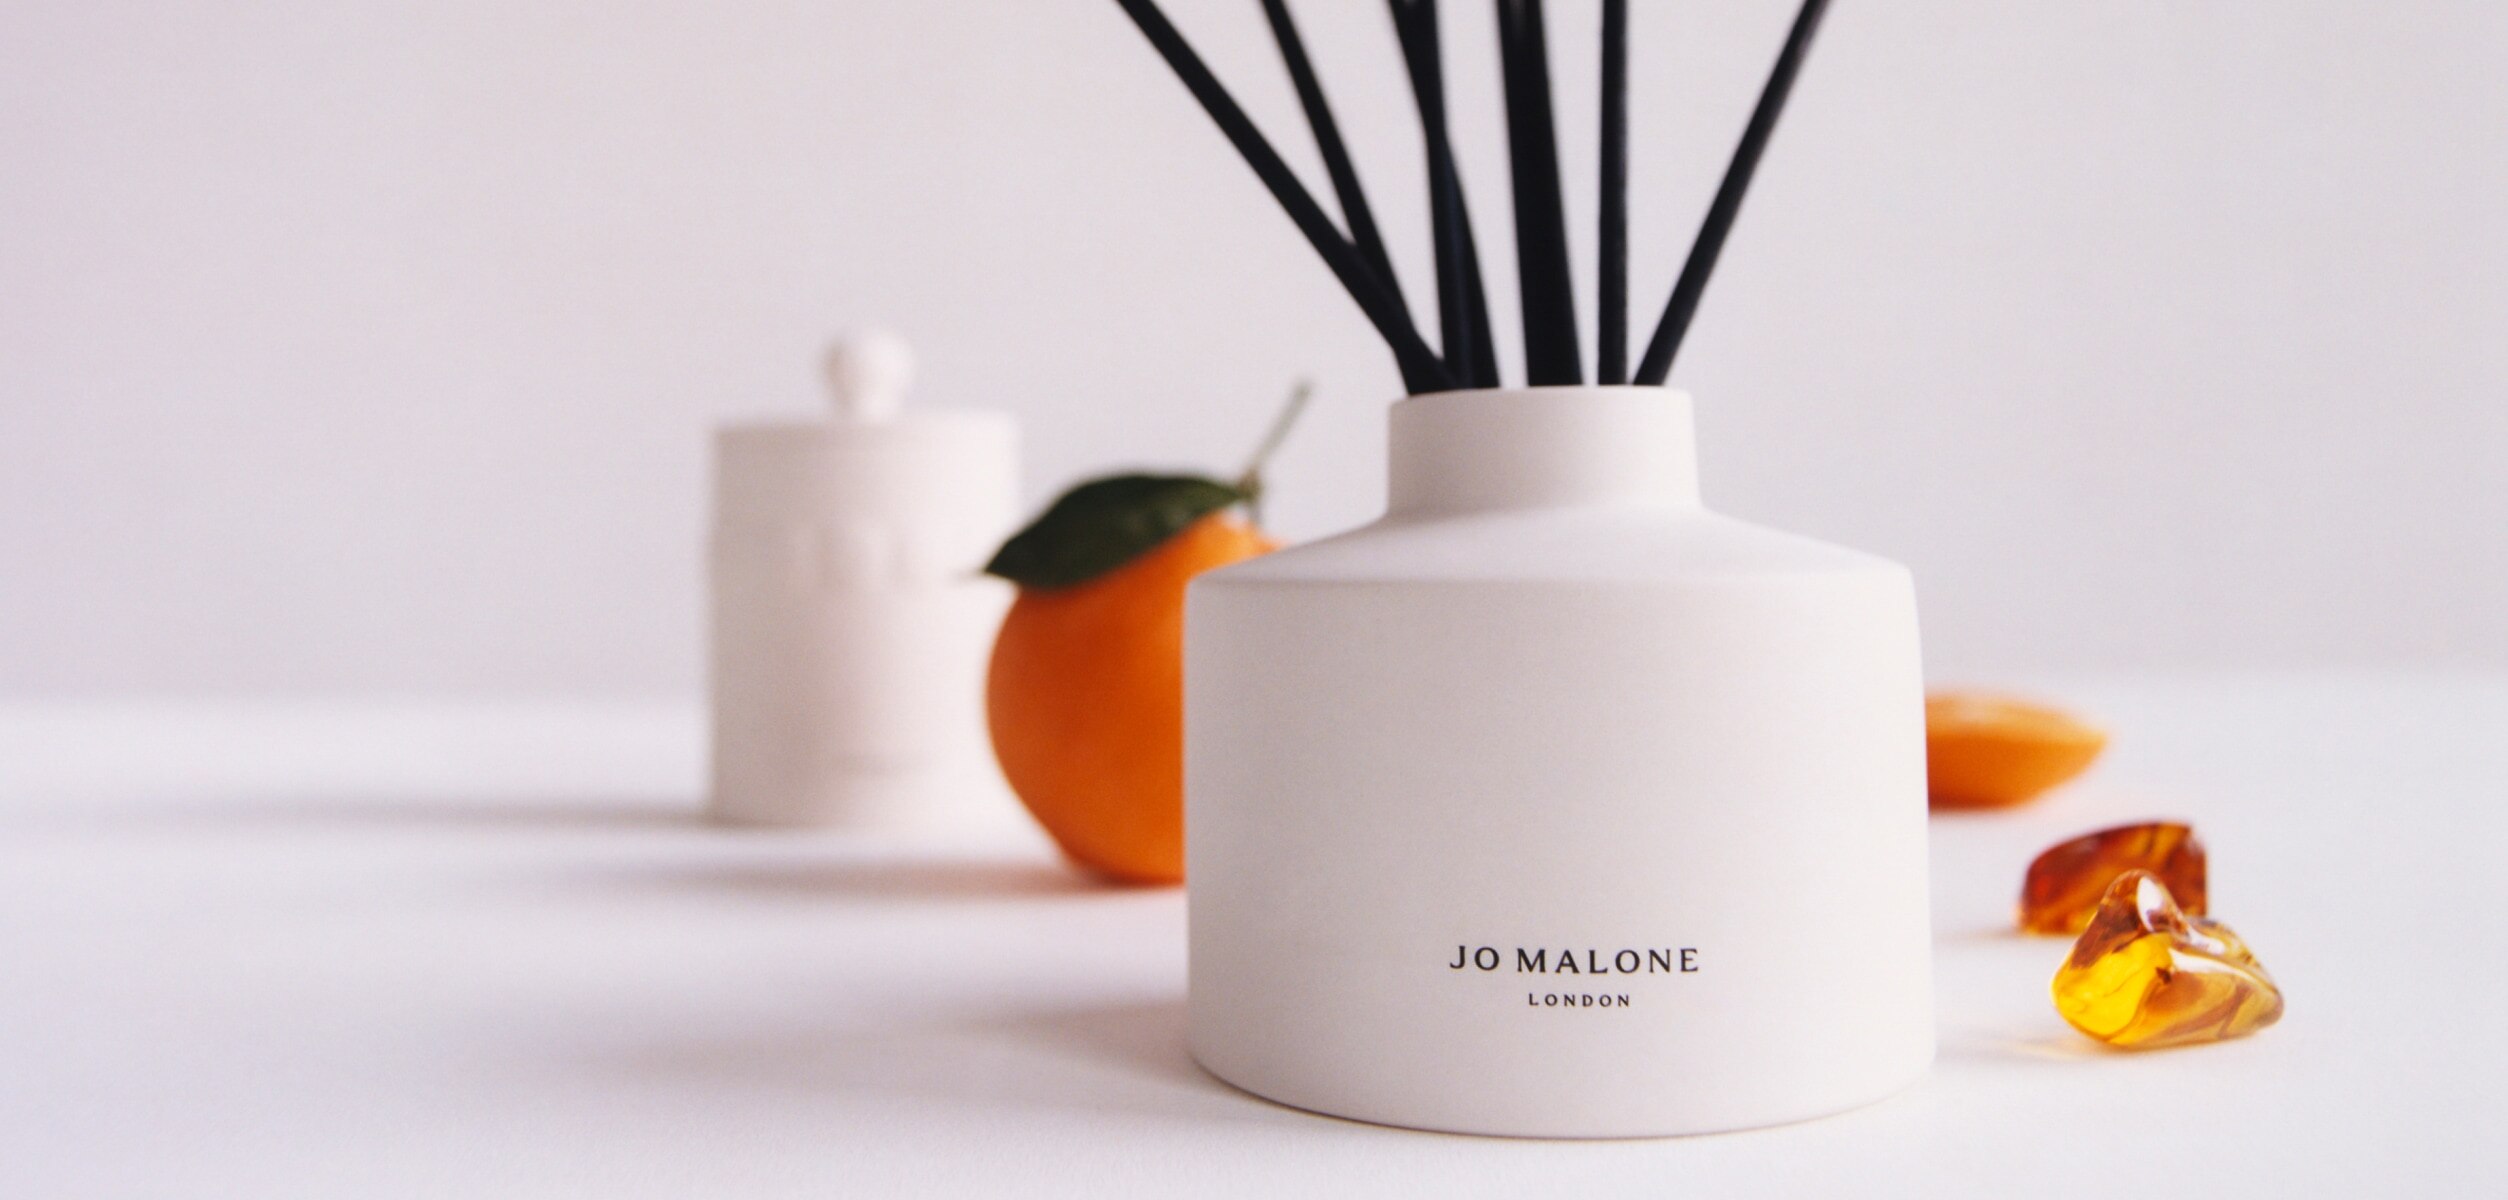 Jo Malone London white ceramic diffuser with black reeds surrounded by oranges and amber for golden amber and orange scent